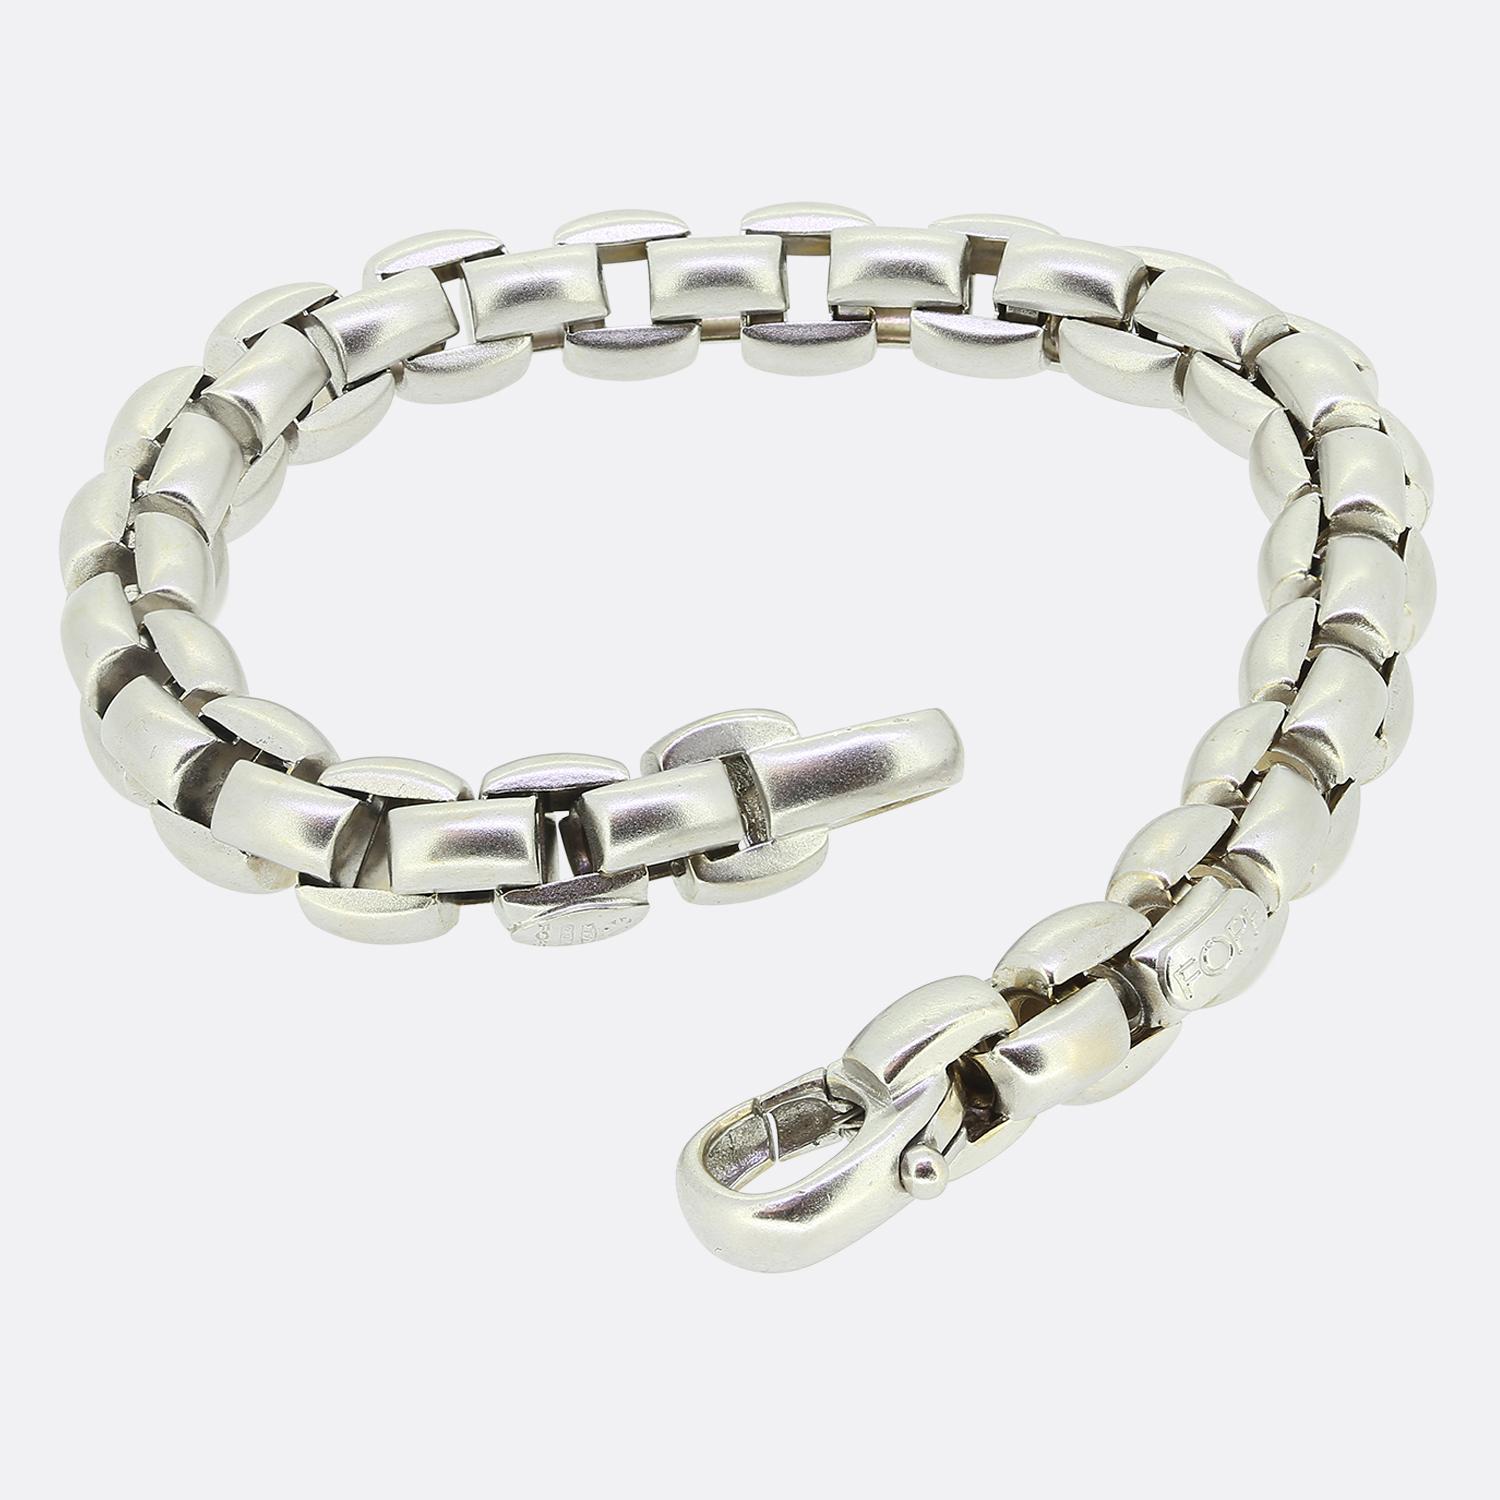 This is an 18ct white gold bracelet from the luxury jewellery designer, Fope. This bracelet forms part of the Eka Collection is crafted in 18ct white gold, with a chunky, rope inspired linked chain. Unlike most Fope bracelets which have a polished